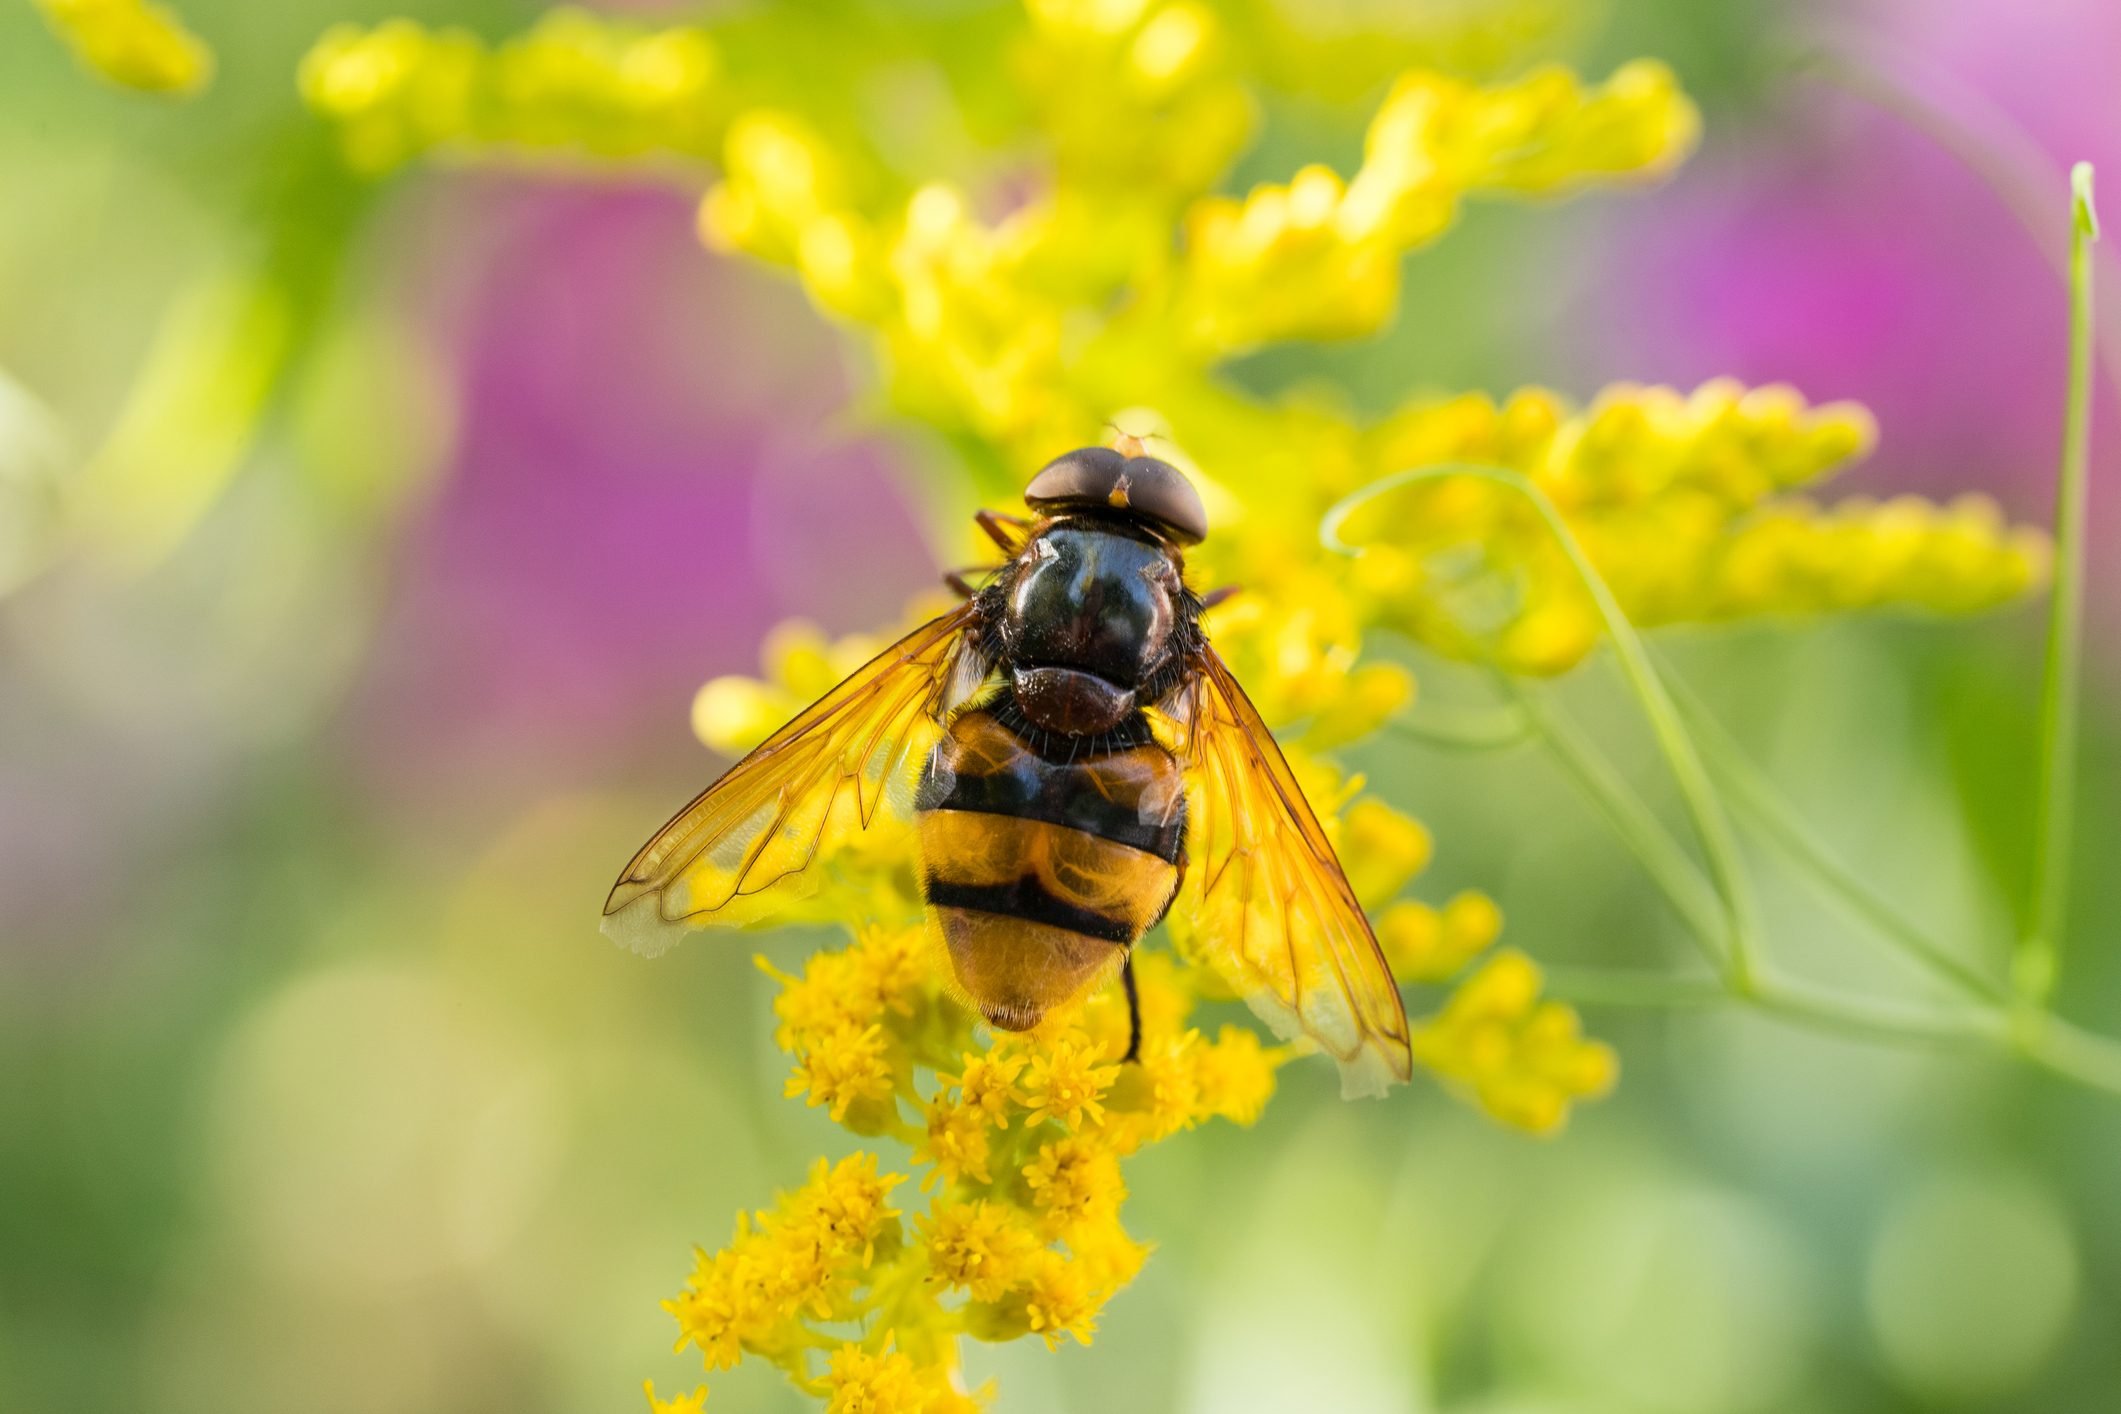 Insects Like Bee Fly On The Flowers Of The Yellow Gardenplant Goldenrod Collecting Pollen And Nectar